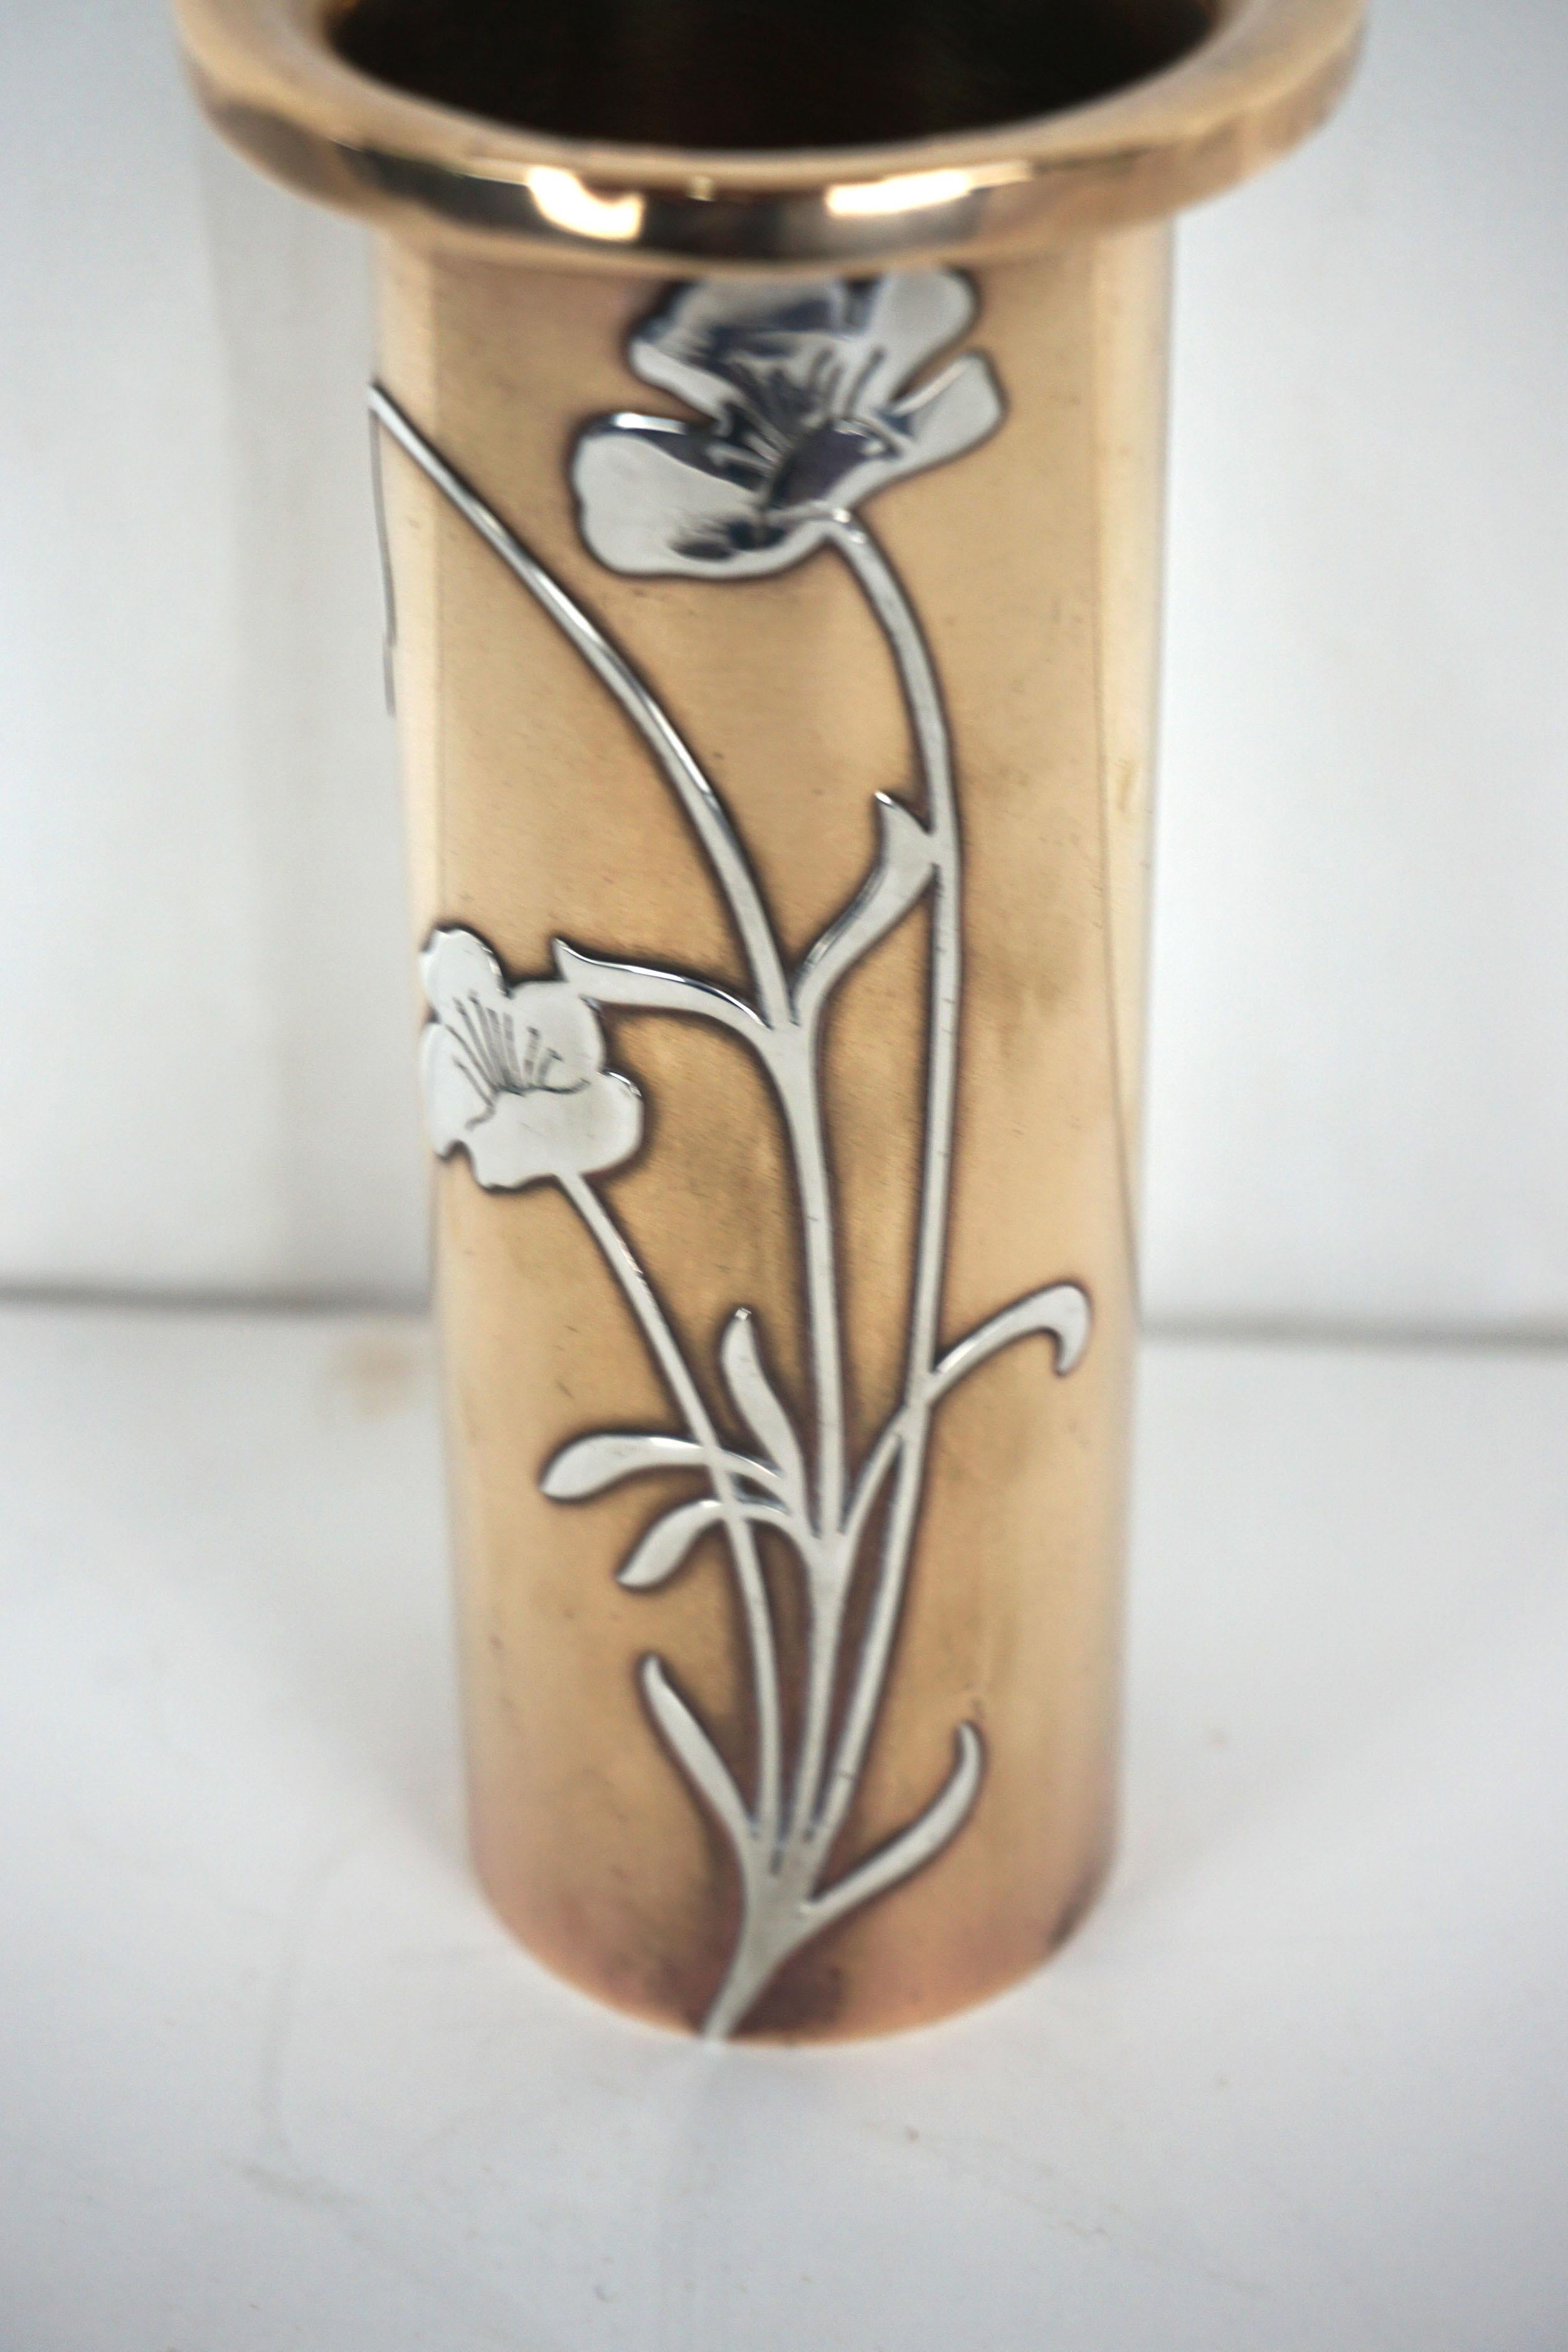 American Early 20th Century California Poppy Art Nouveau Sterling Overlay on Bronze Vase